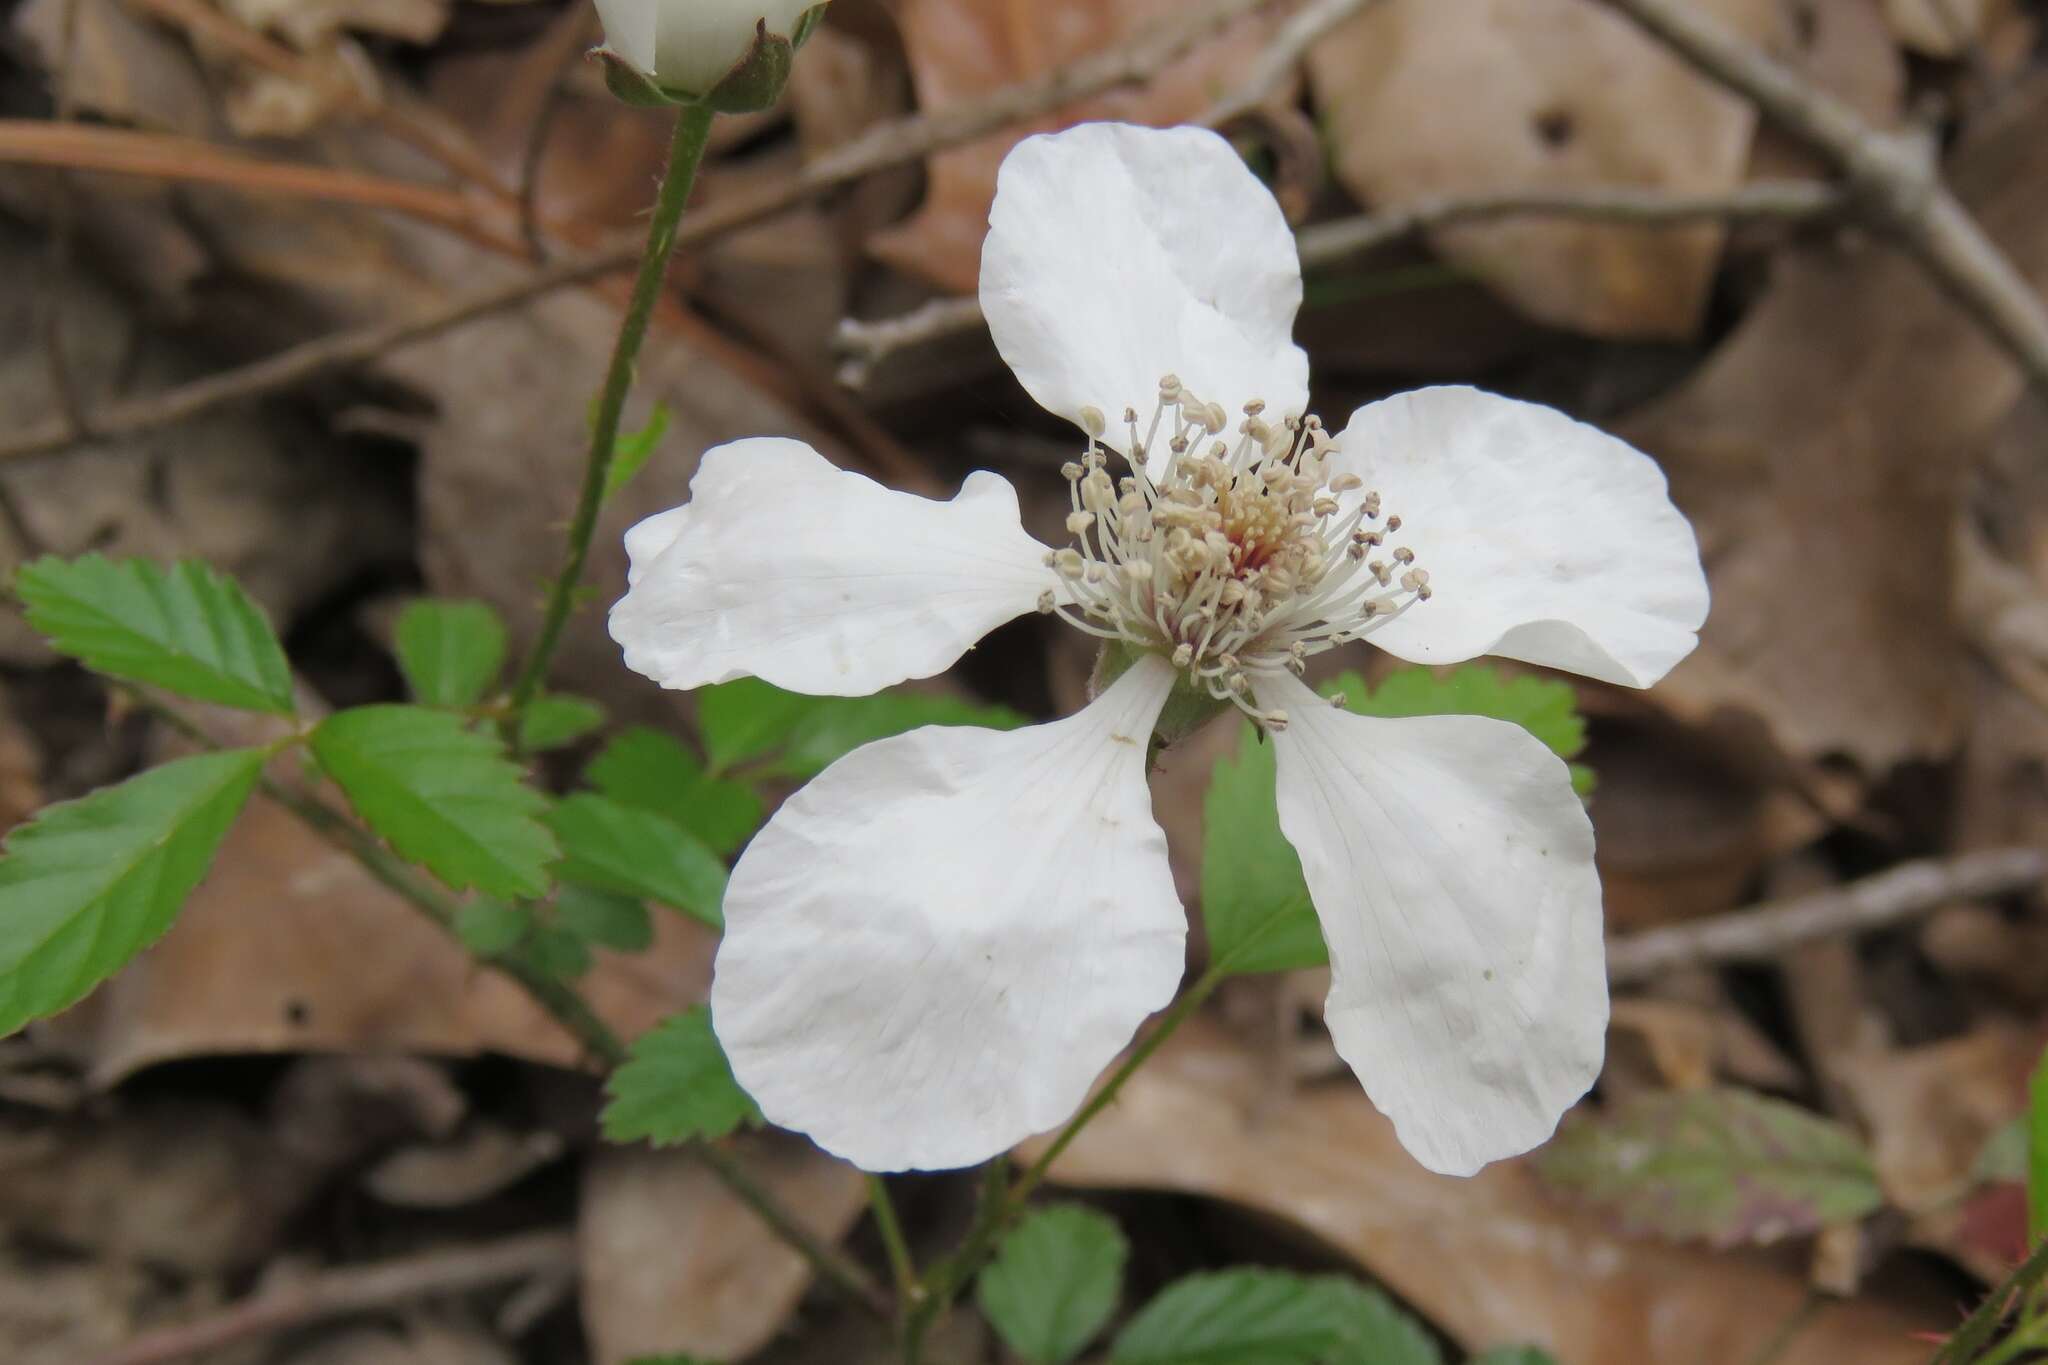 Image of southern dewberry